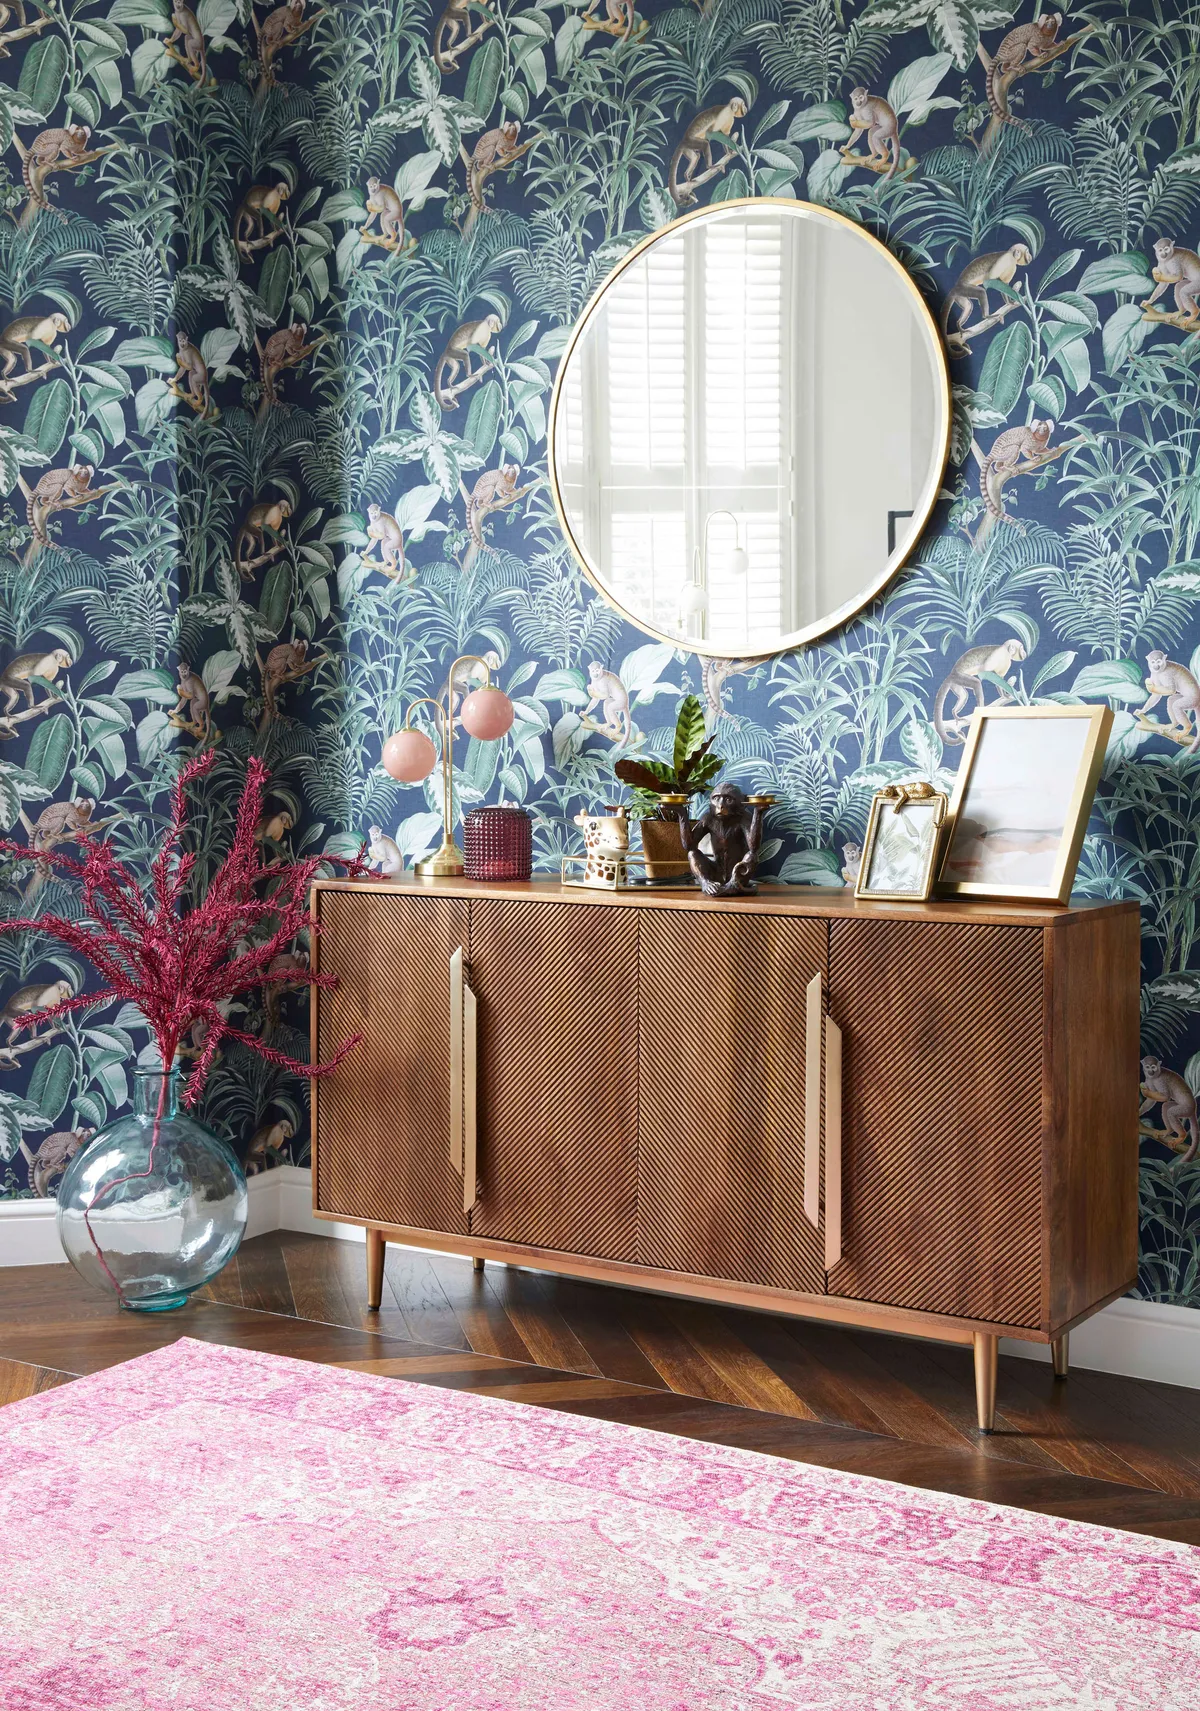 Jungle luxe Navy wallpaper, £12 per roll; Anya large sideboard, £529; Mila Magenta rug, from £65, all Dunelm